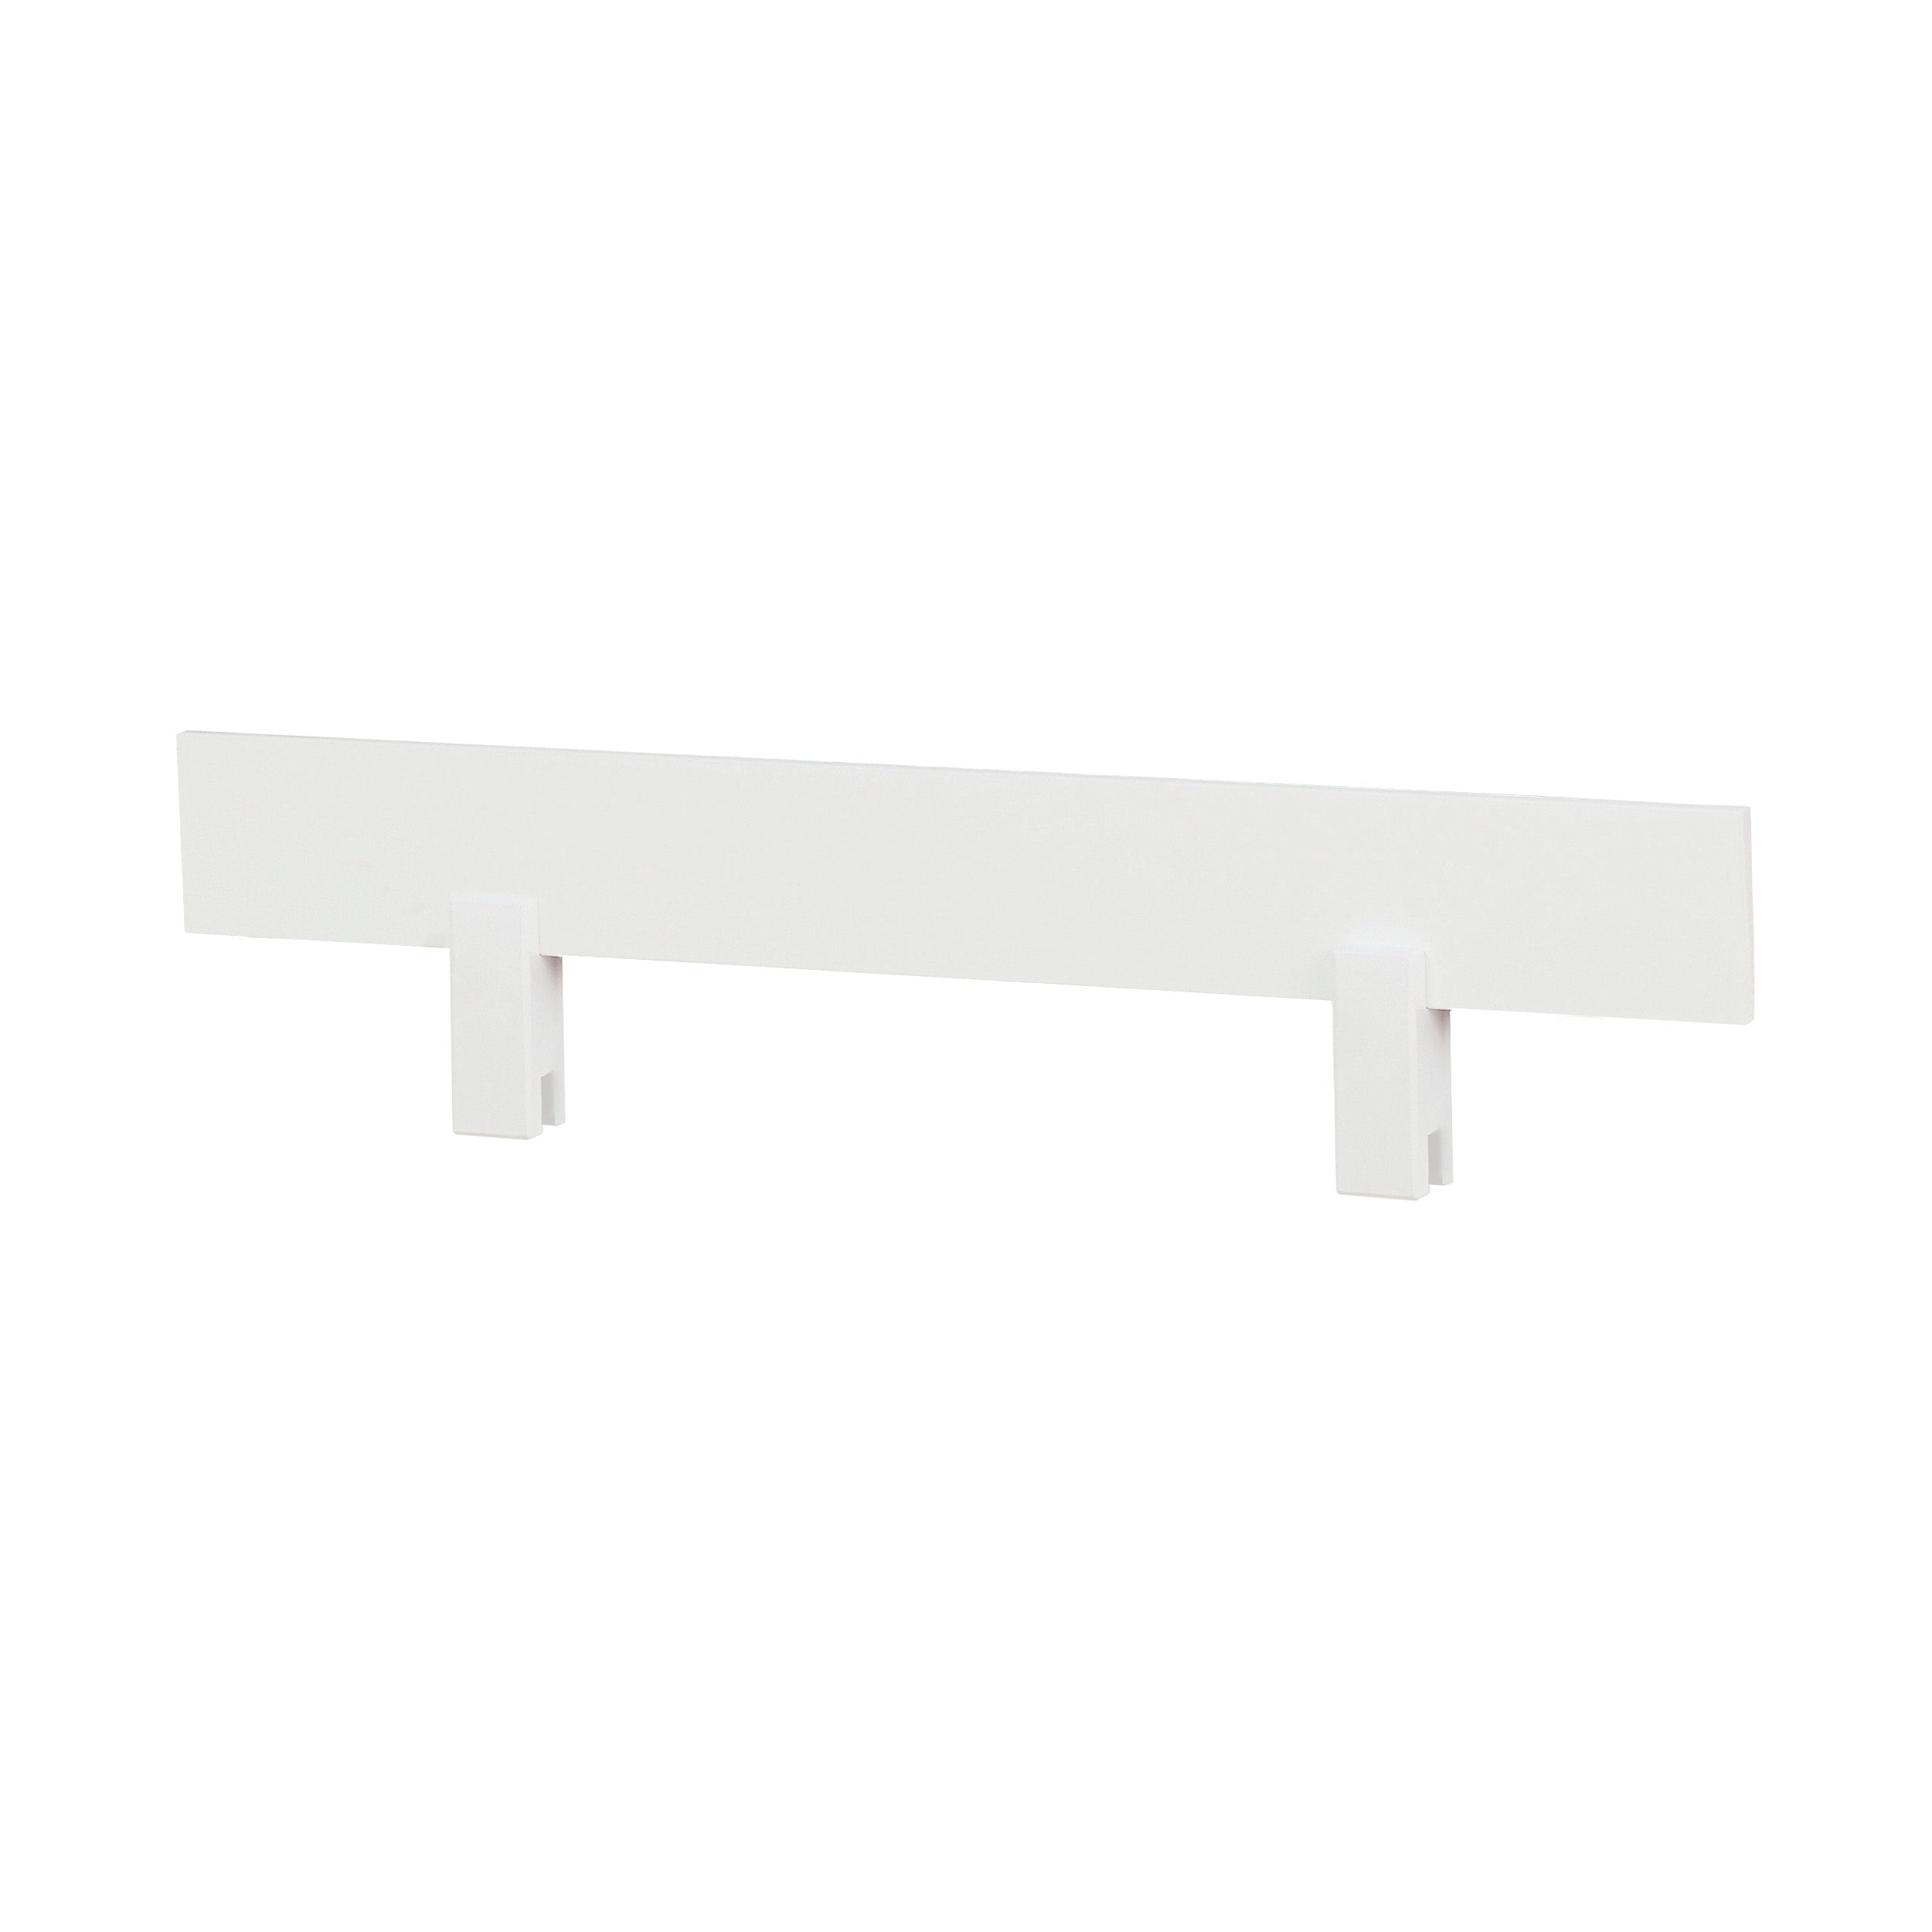 Hoppekids Bed Rail for ECO Dream, ECO Luxury, and DELUXE